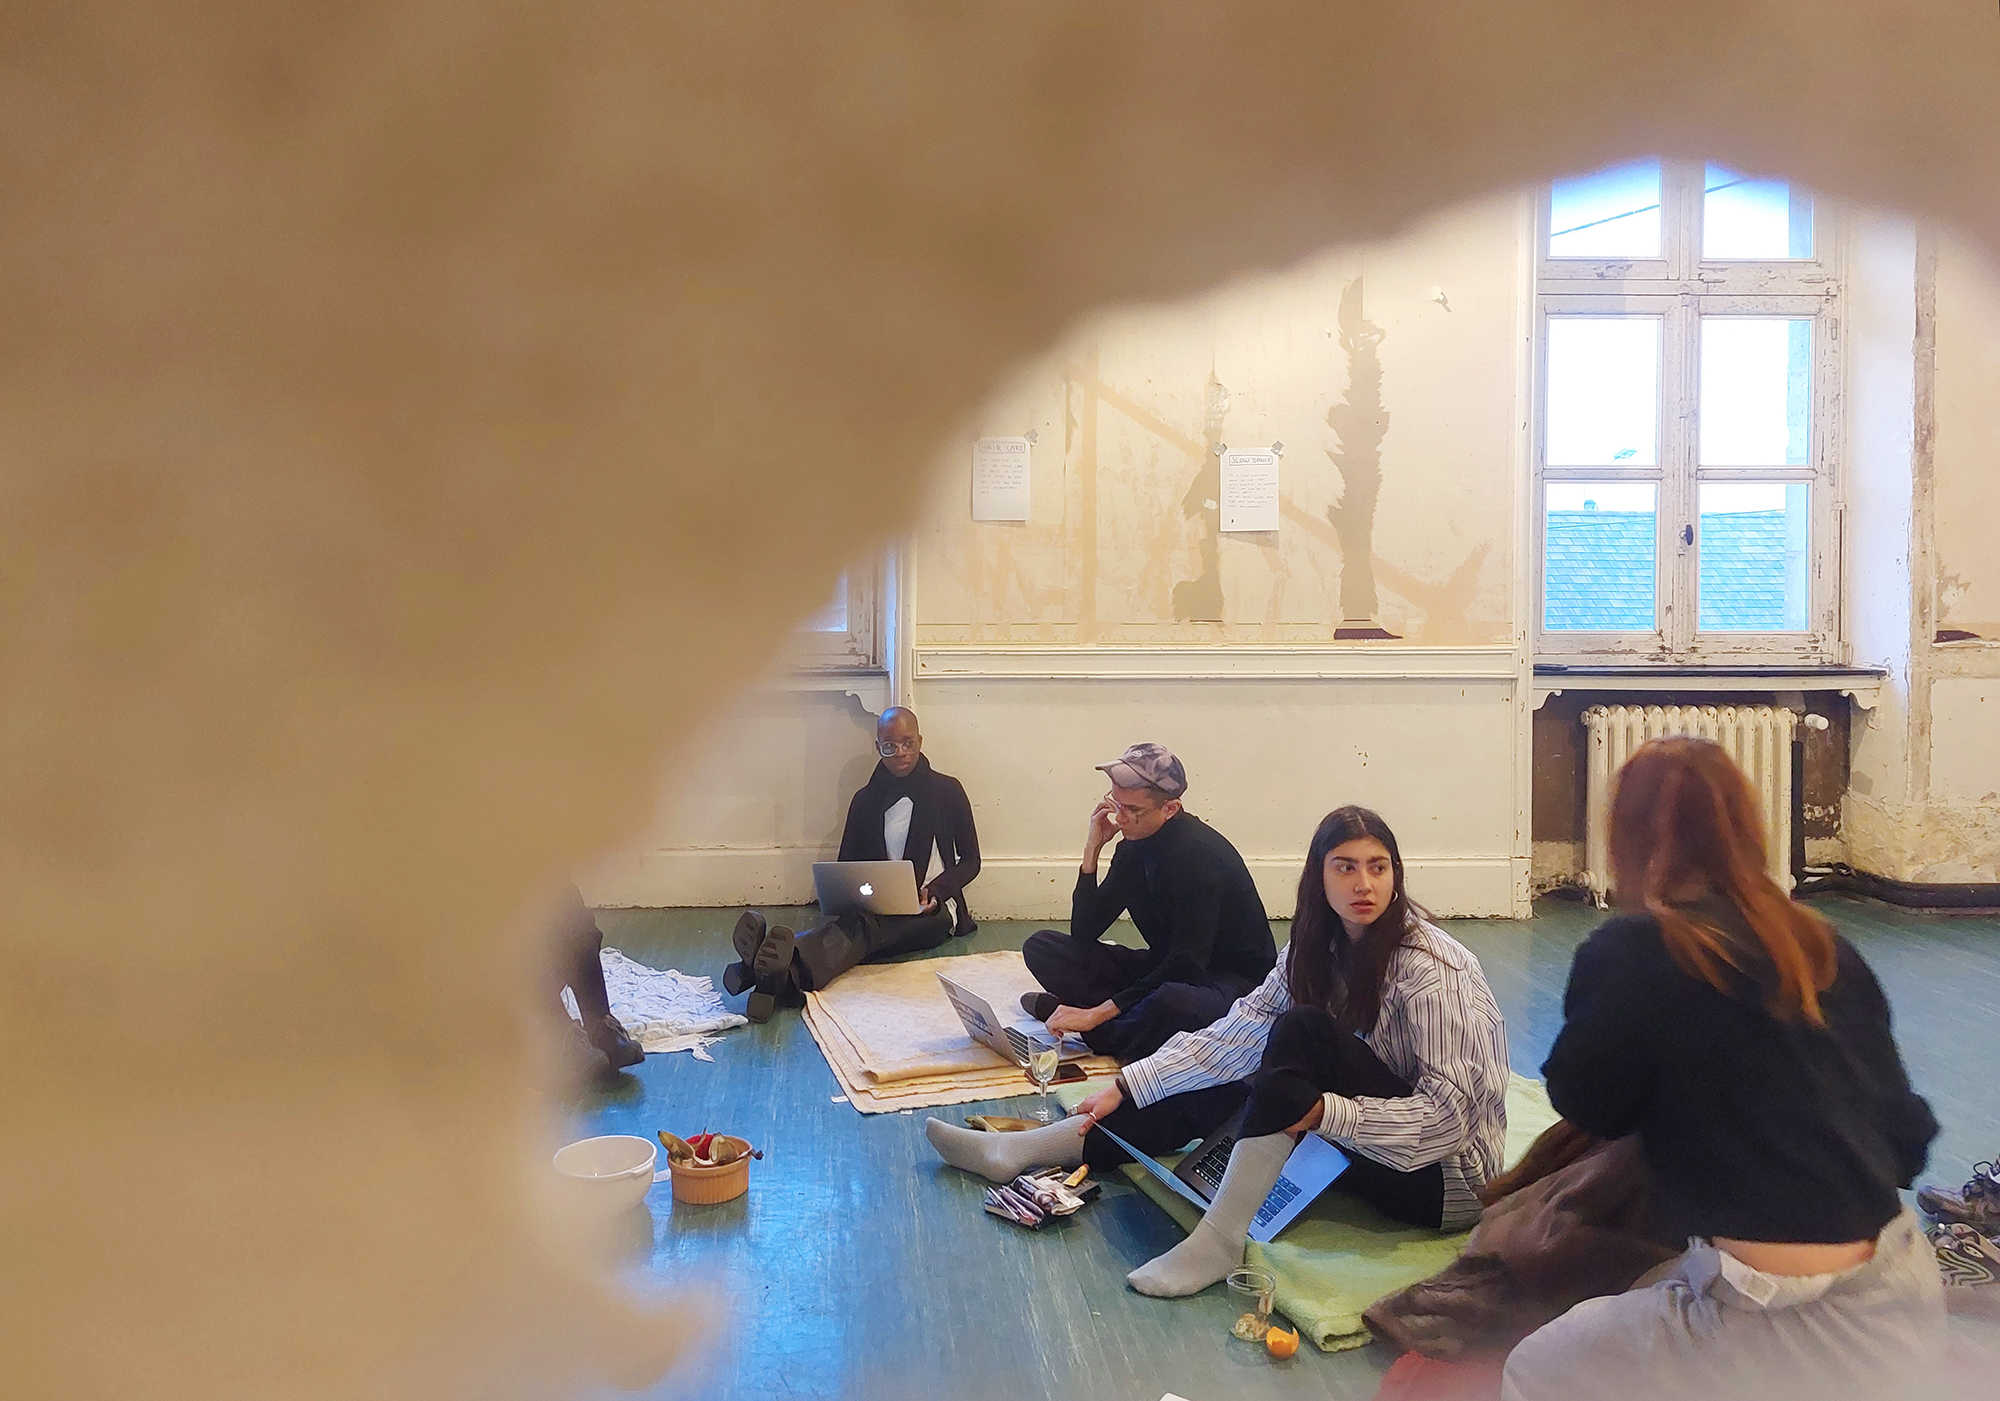 COOP Study group: Publishing Practices convening at PAF's Yoga room ~ observed through the paper cuts of the door window. PAF (St.Erme), March 2023. Photo credit: Nikos Doulos